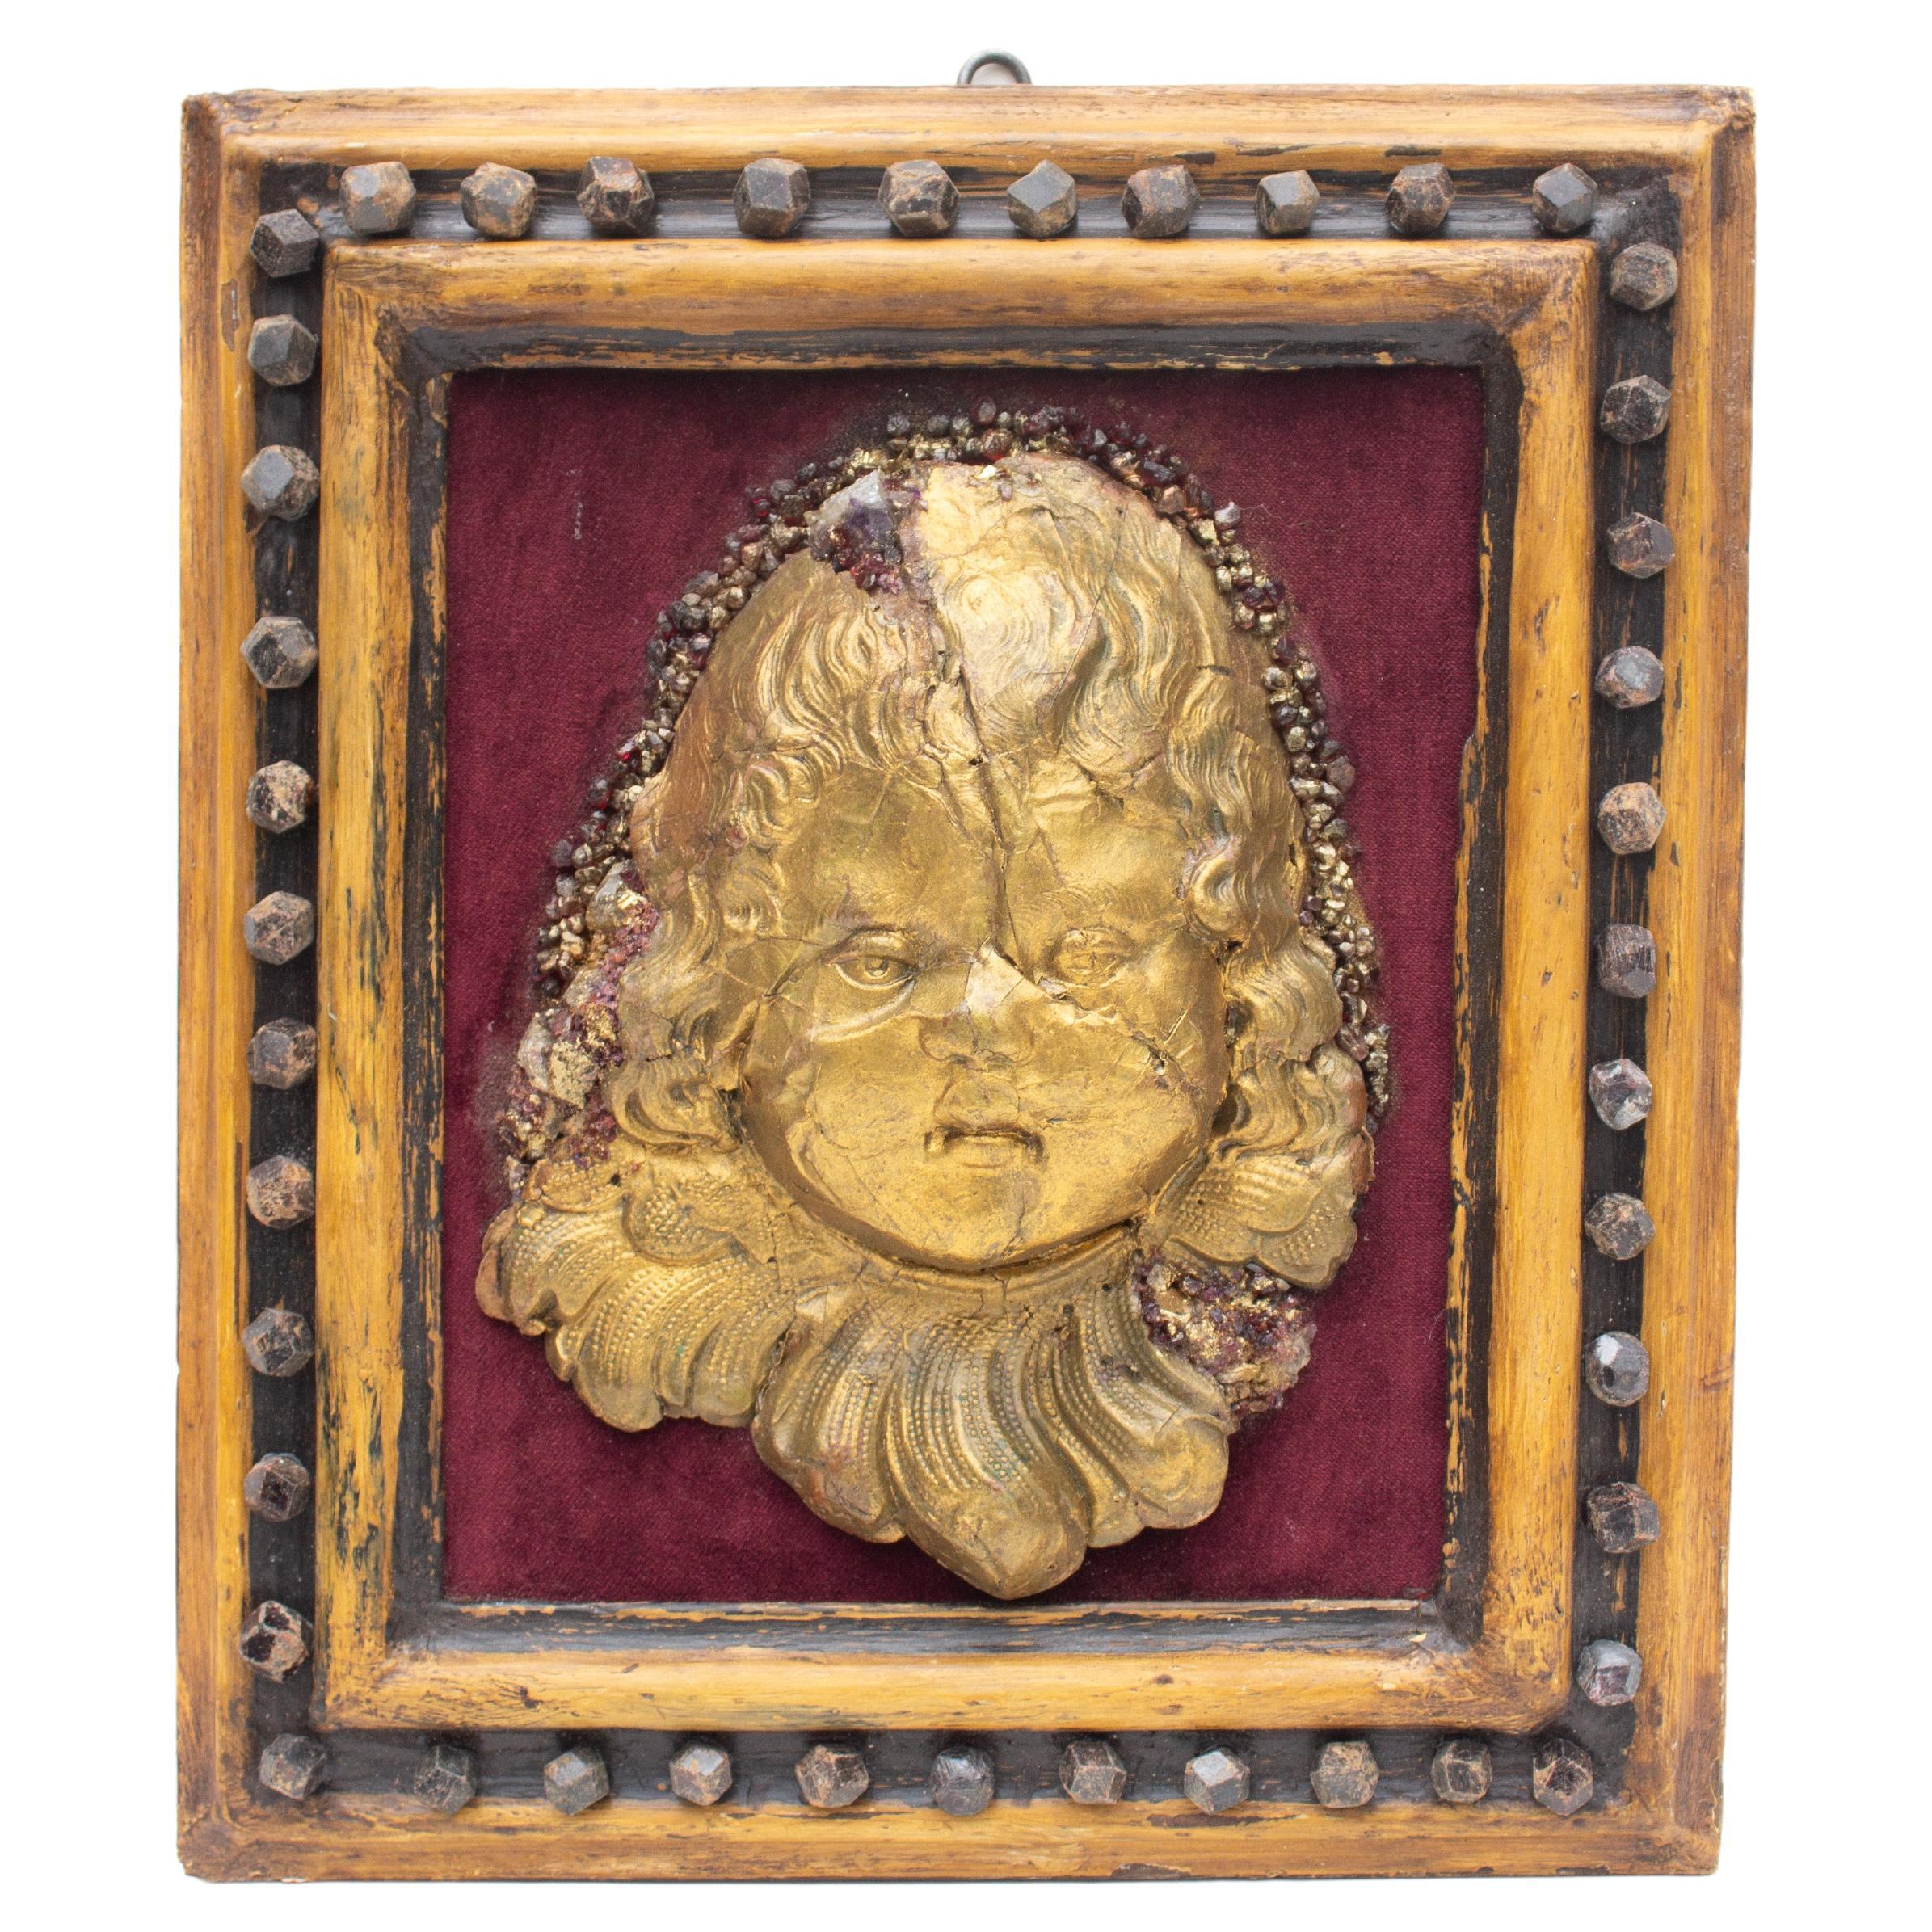 Framed 18th Century Italian Gold Leaf Angel Head Wall Relief Sculpture For Sale